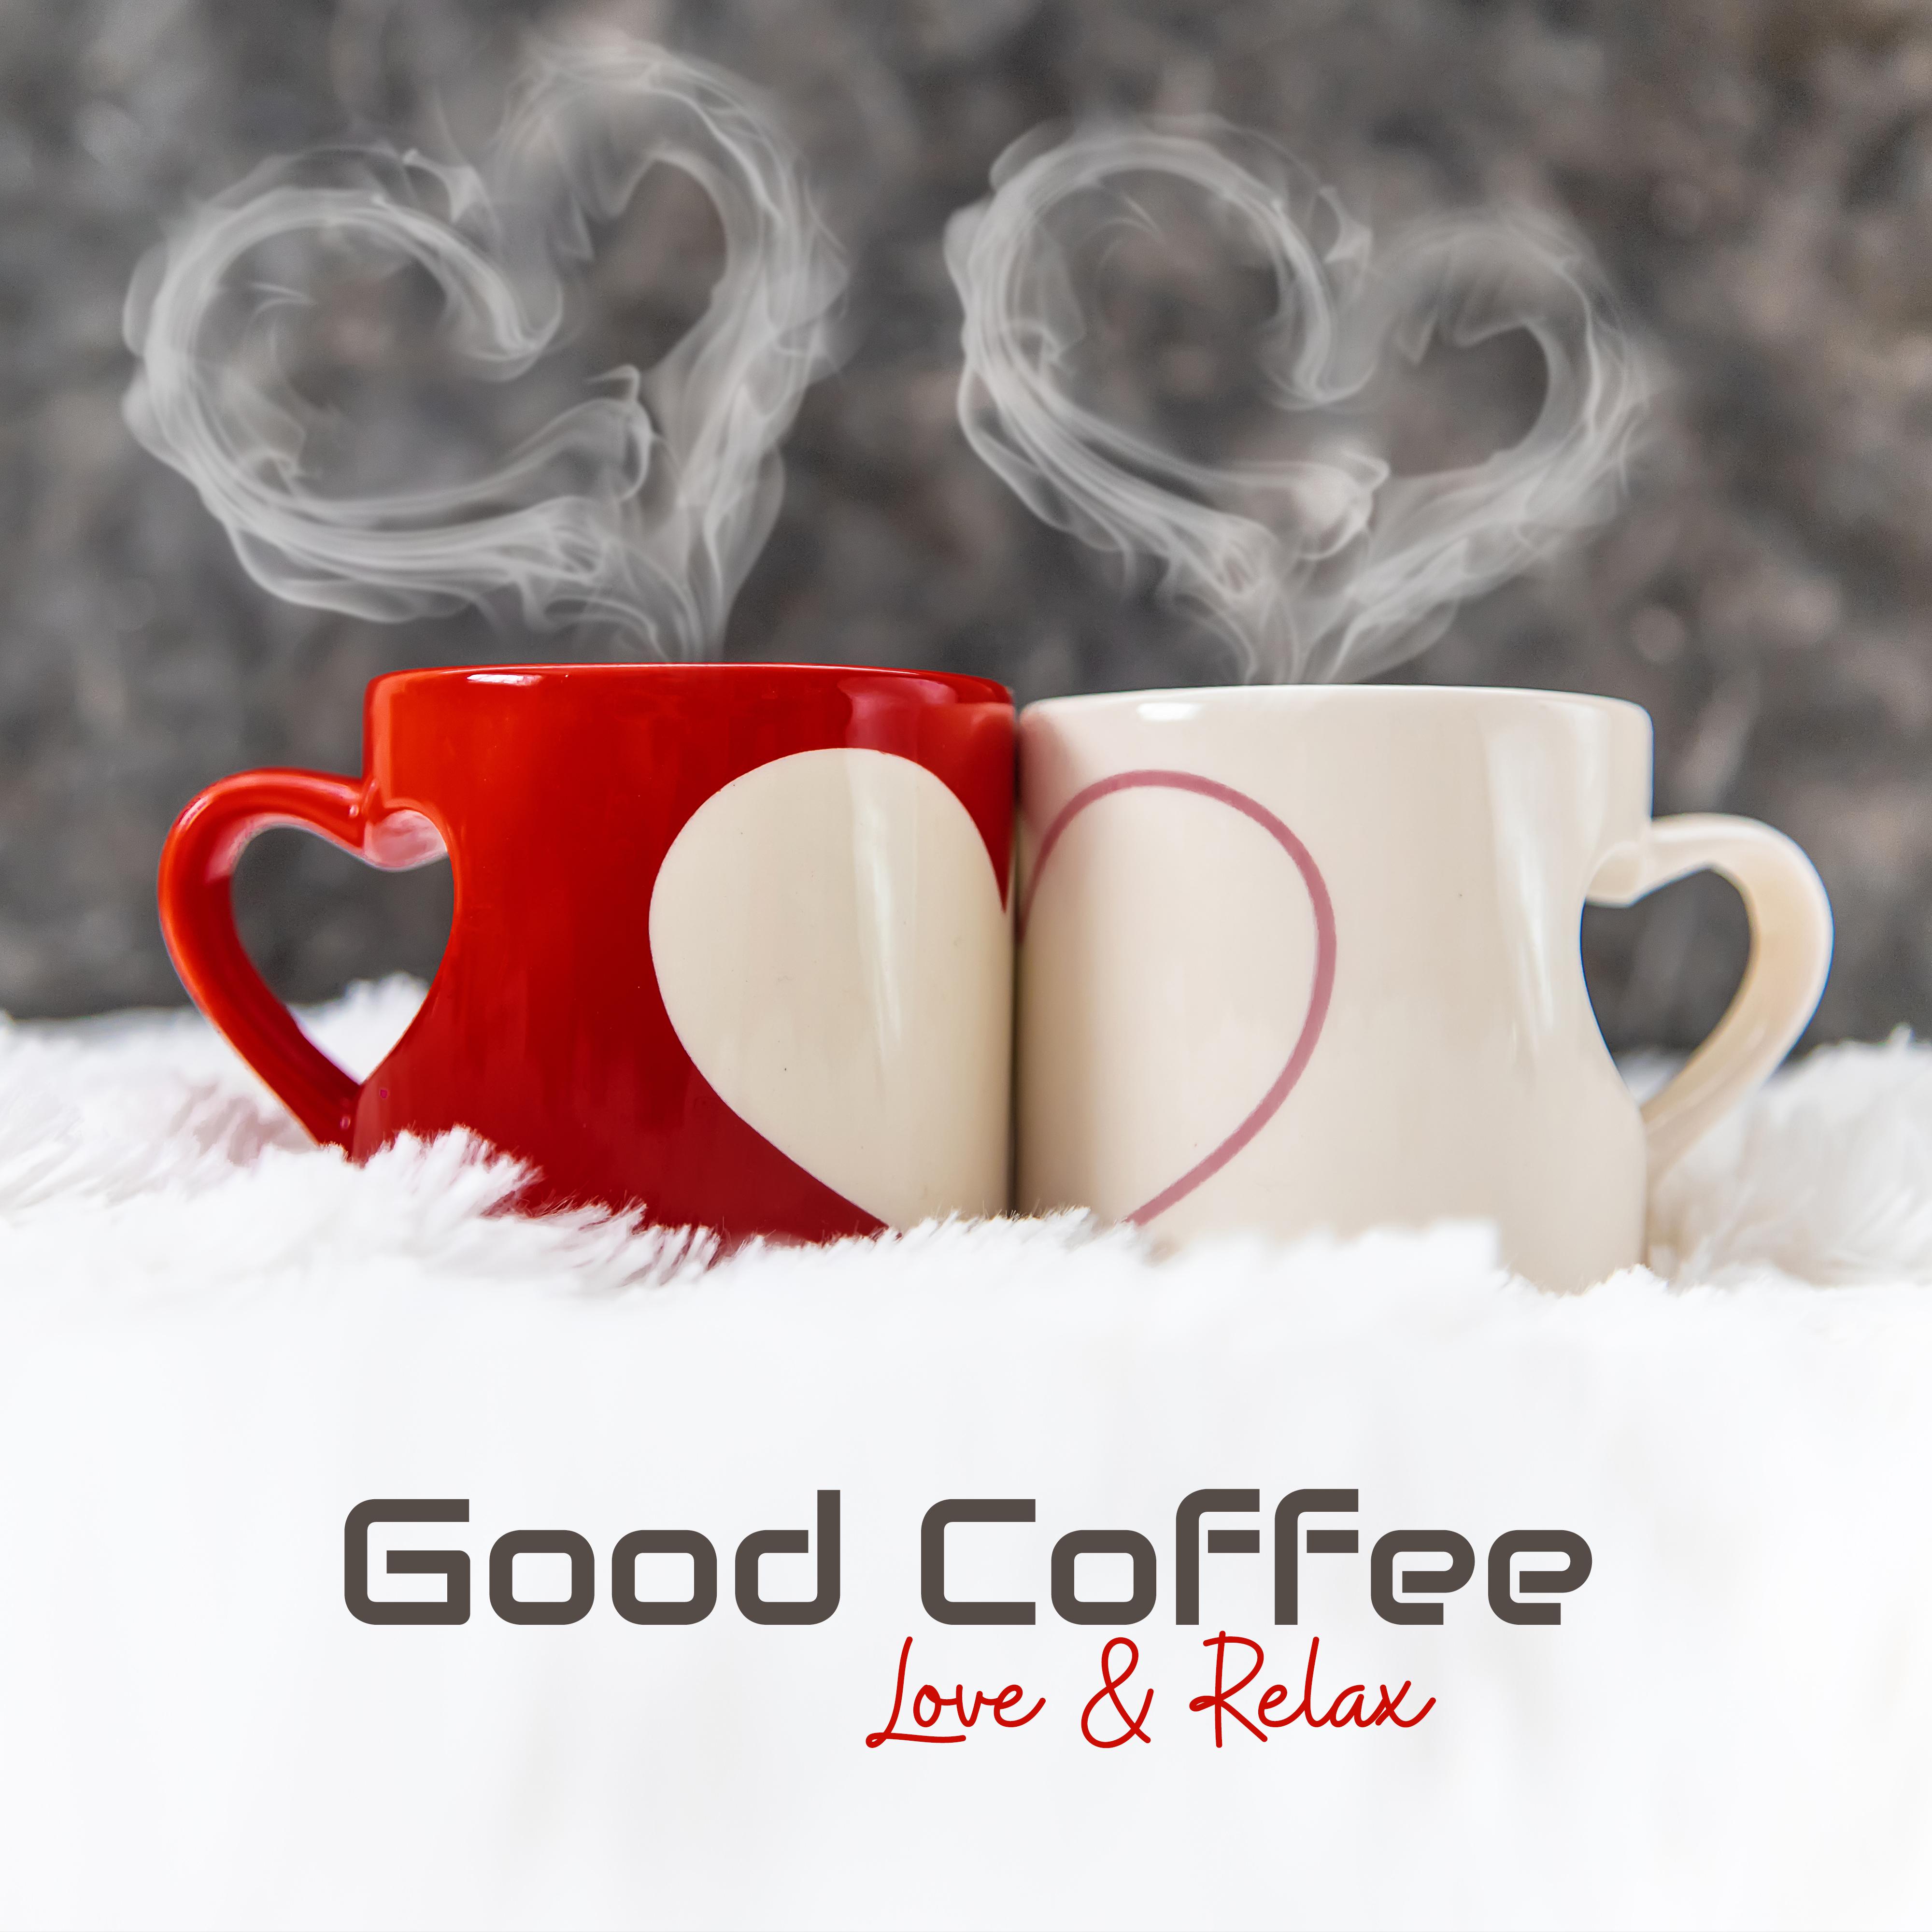 Good Coffee, Love & Relax: Collection of 2019 Smooth Jazz Soft Music for Cafe, Vintage Melodies to Spend Blessed Time, Sounds of Piano, Contrabass, Saxophone & More